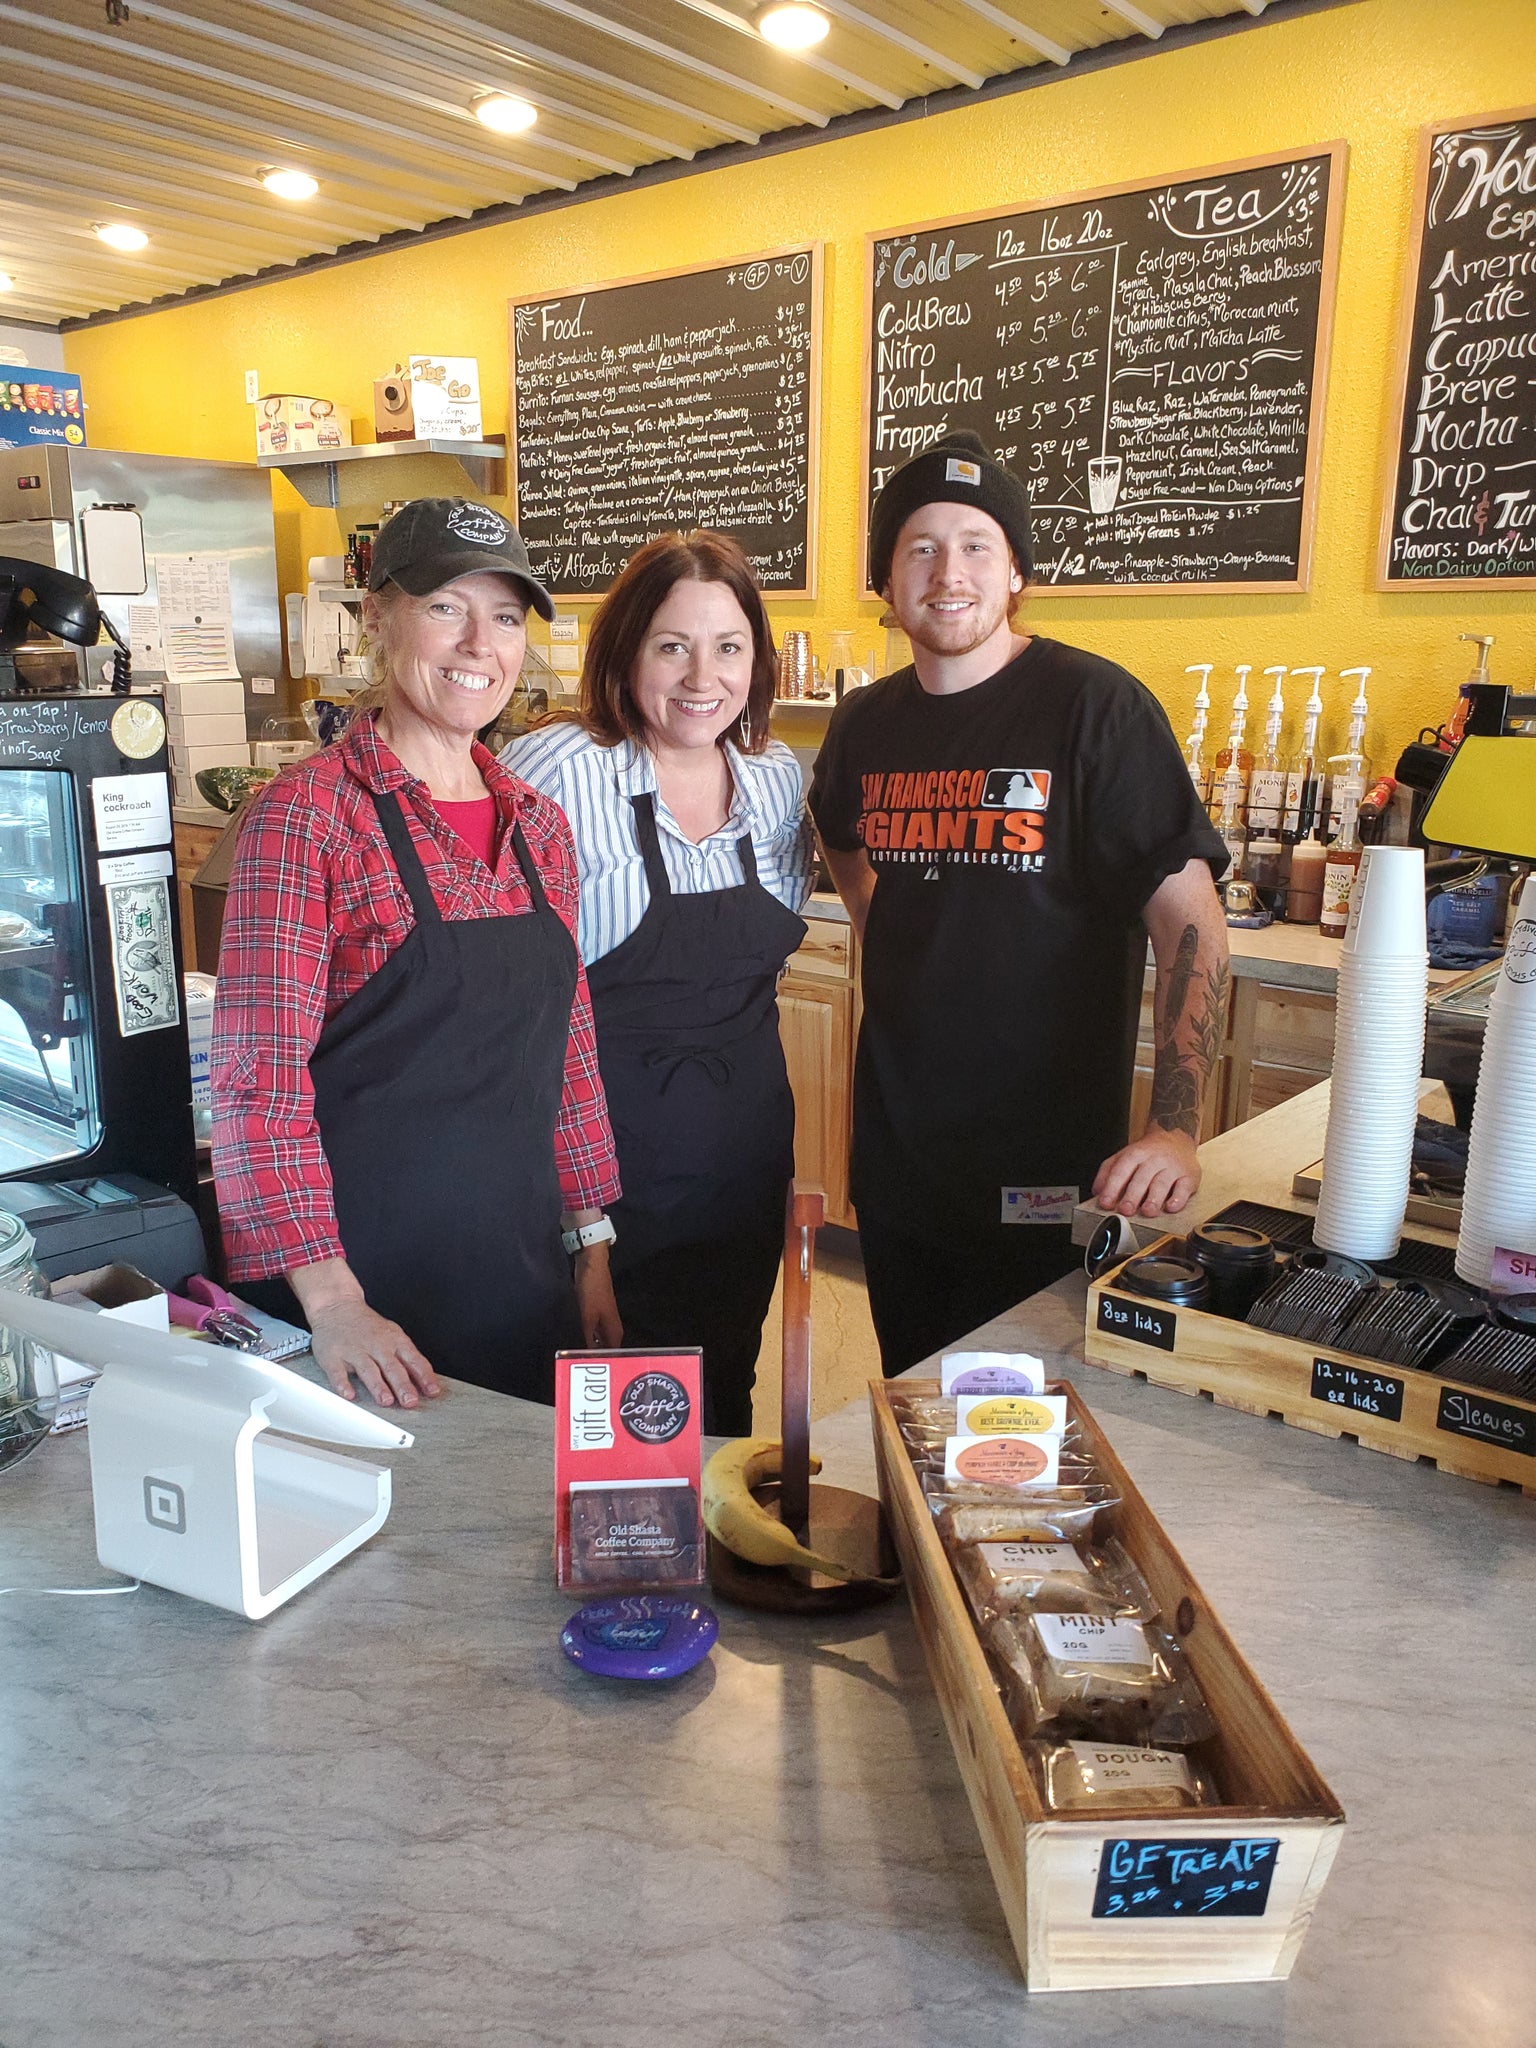 The baristas and owner at Old Shasta Coffee Company